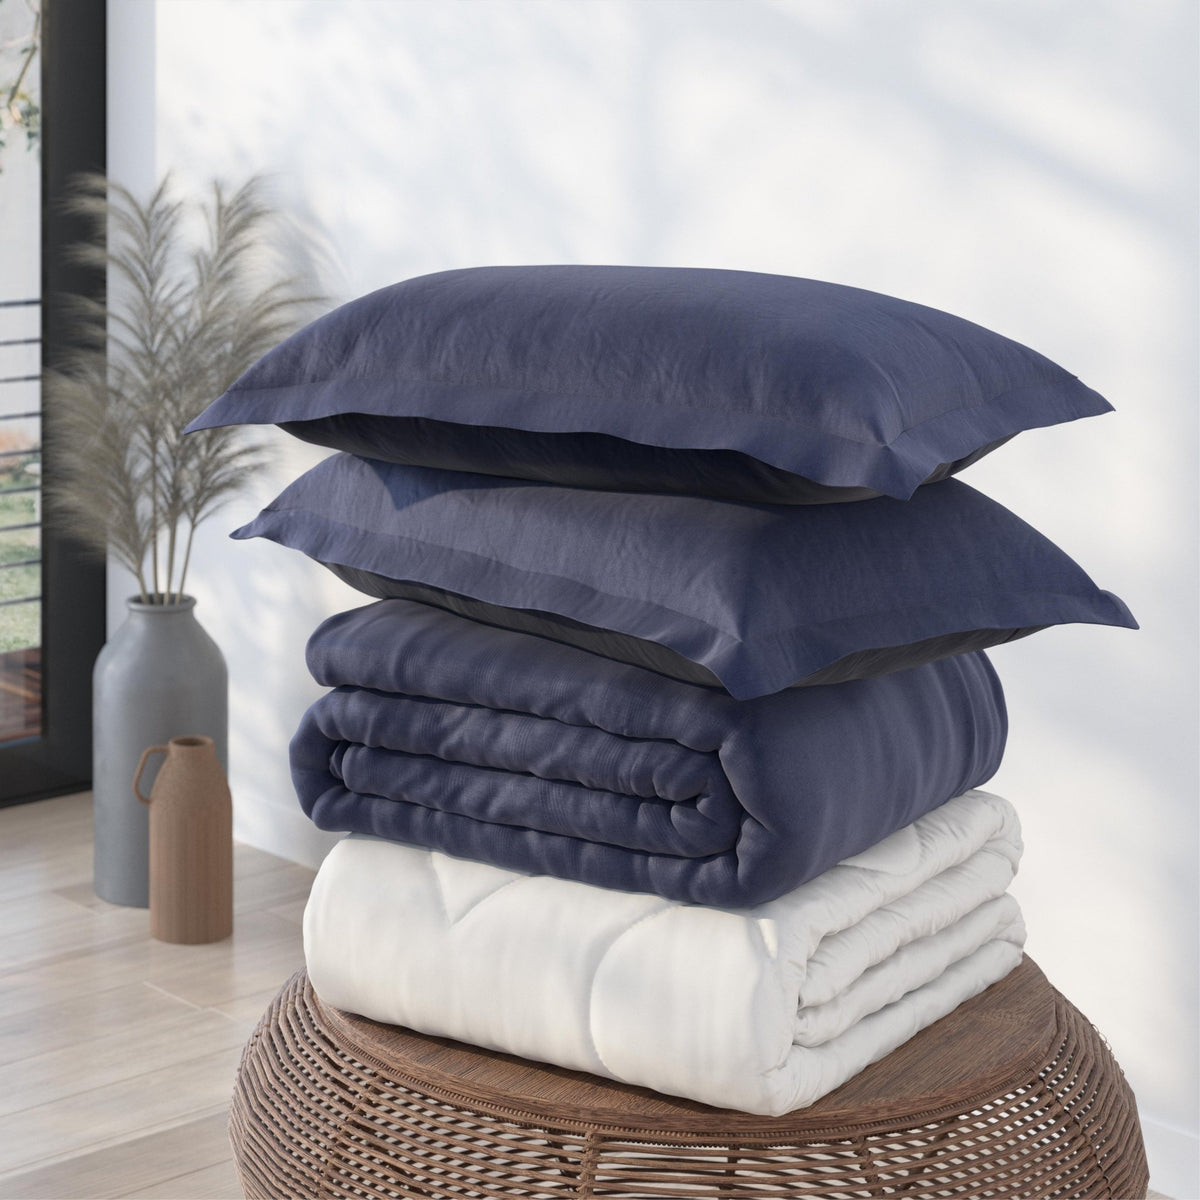 Image of a pile of bedding on top of a brown table. The bedding shown includes (from top to bottom): 2 Midnight/Celestial Pillow Shams with the Midnight side facing up, a neatly folded Midnight/Celestial Duvet Cover + Cooling with the Midnight side showing, and a neatly folded Cooling Duvet Insert 